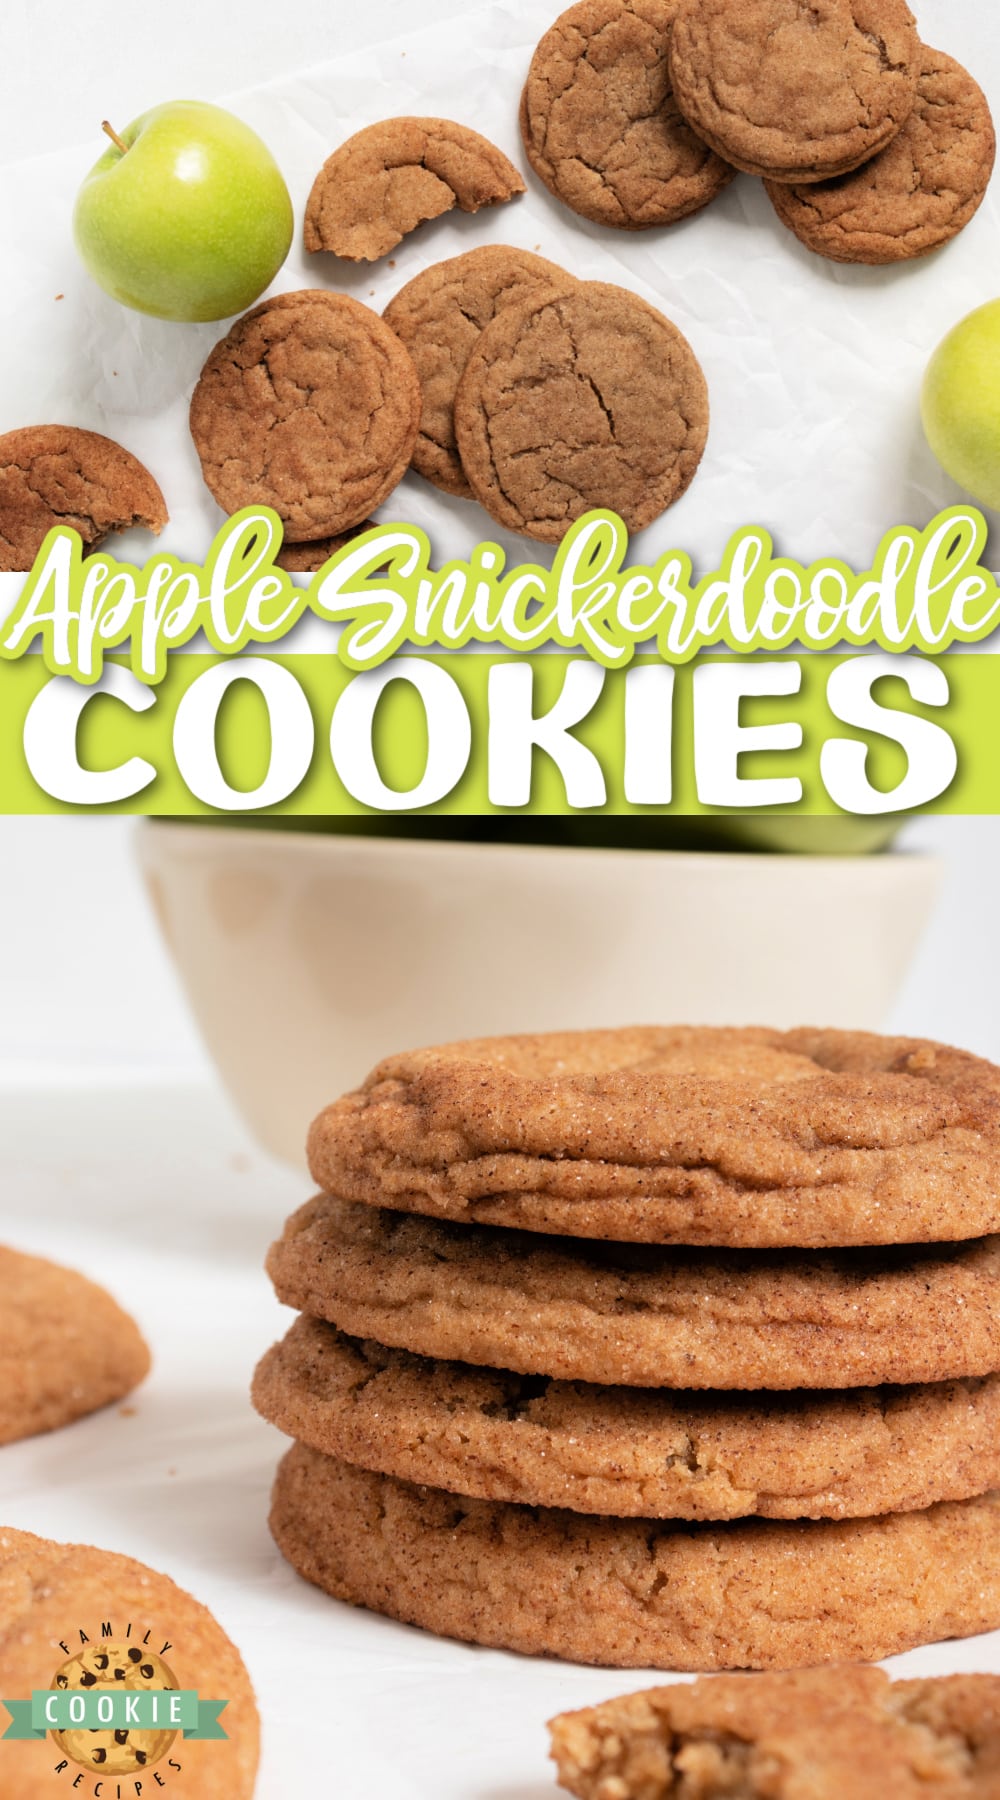 Apple Snickerdoodle Cookies are soft, chewy and full of apple flavor. Made with apple butter and rolled in cinnamon sugar for an irresistible cookie that’s perfect for the fall! via @buttergirls